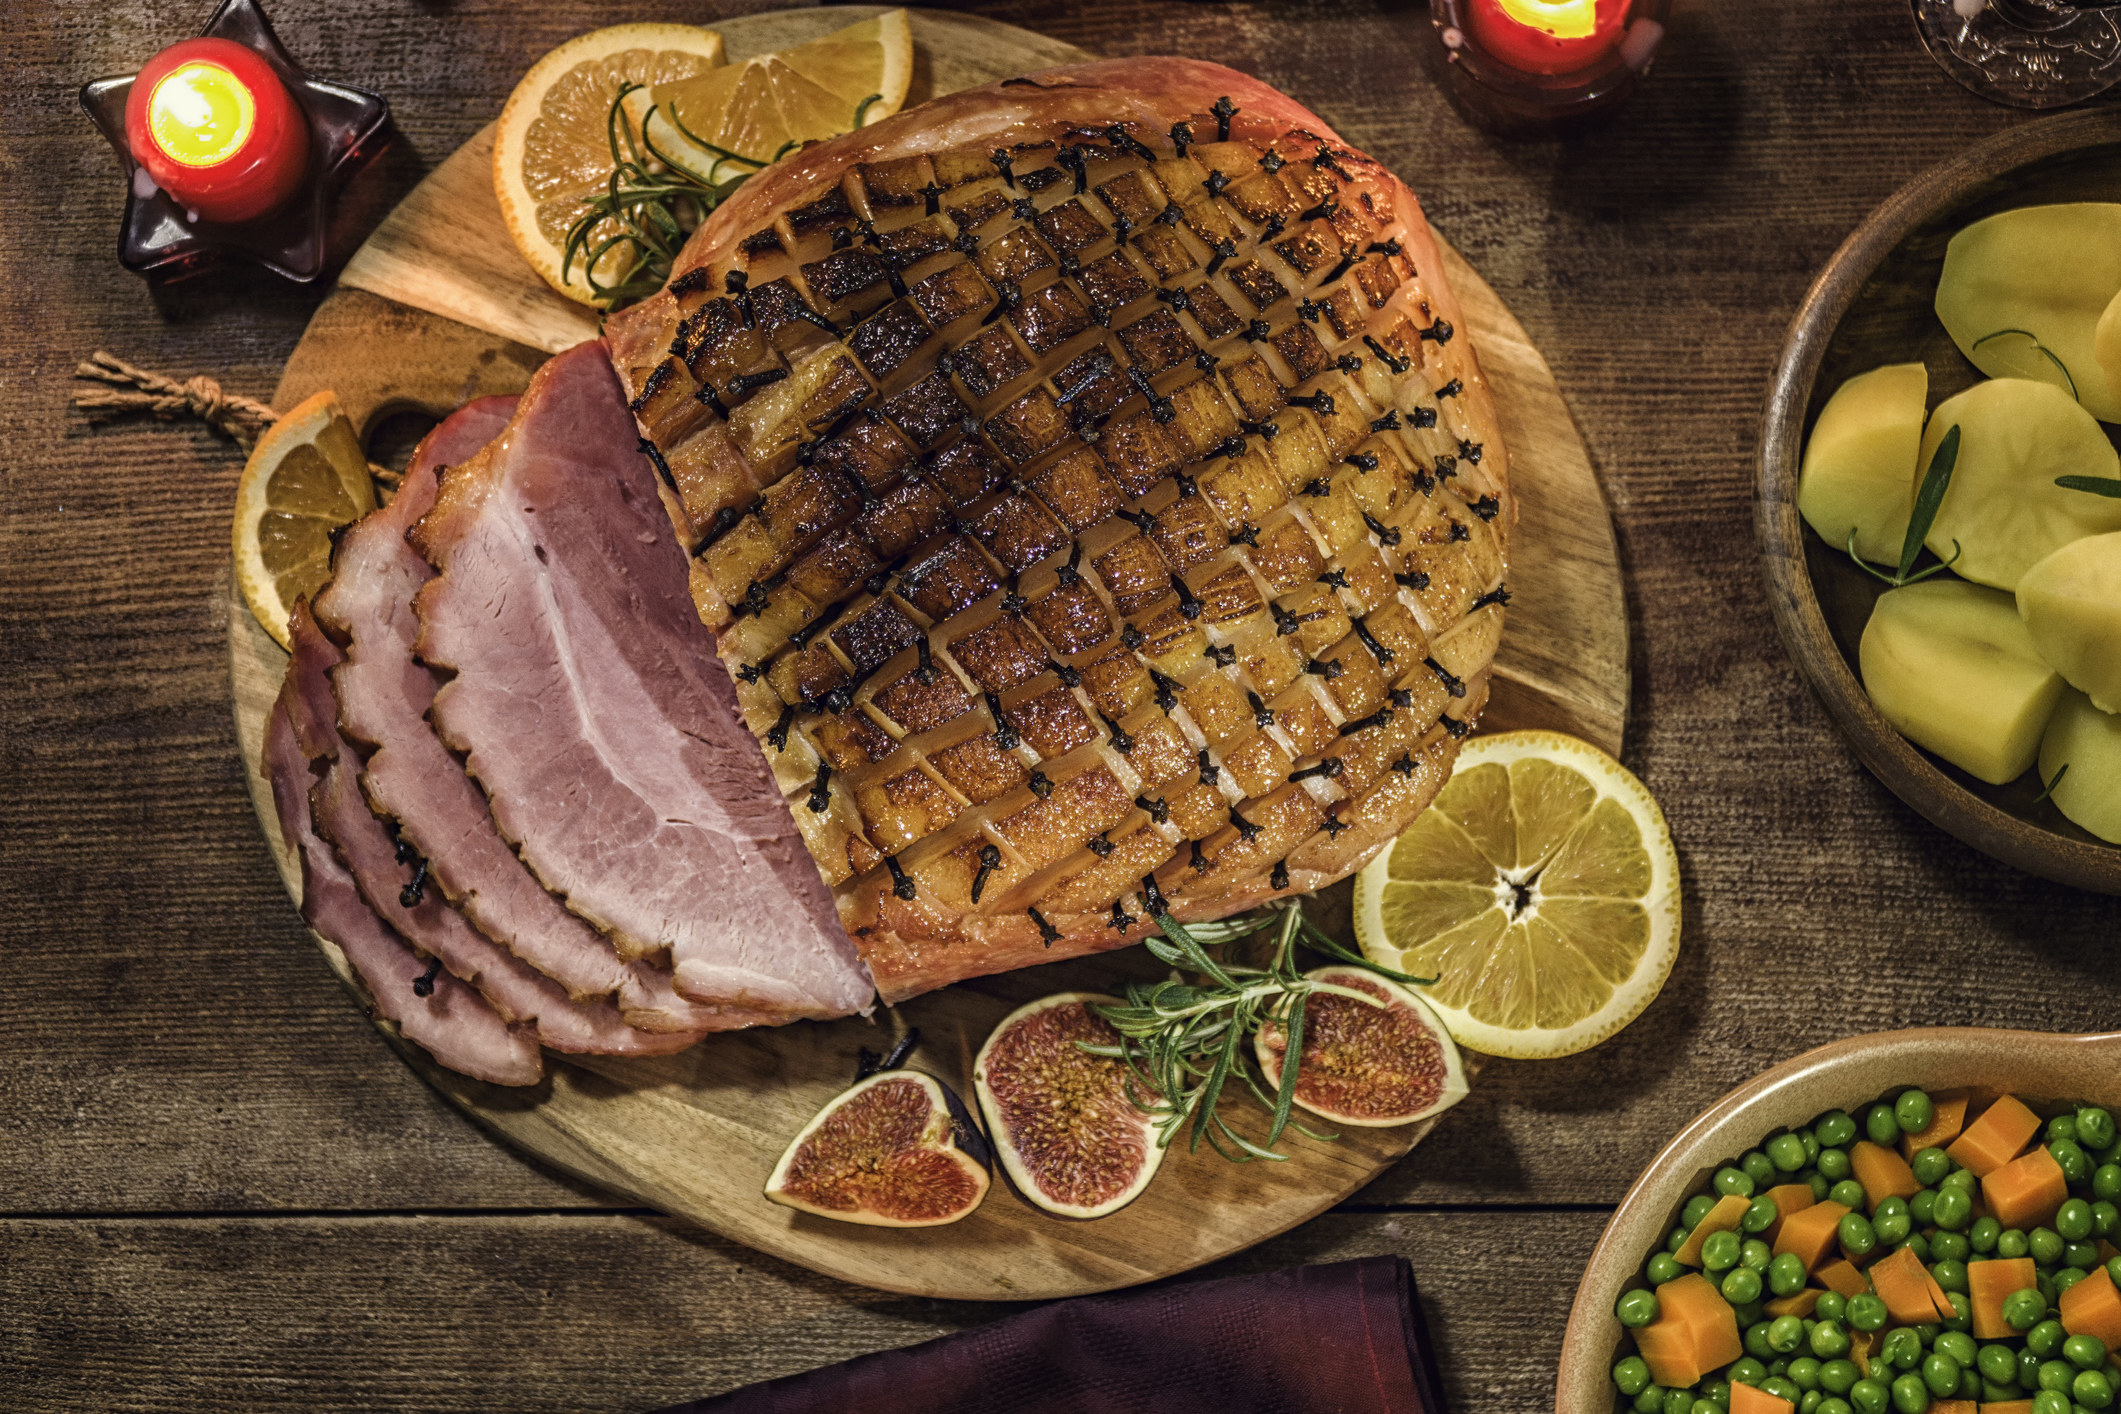 A ham joint with some slices, sitting on a chopping board and surrounded by cut up fruit.